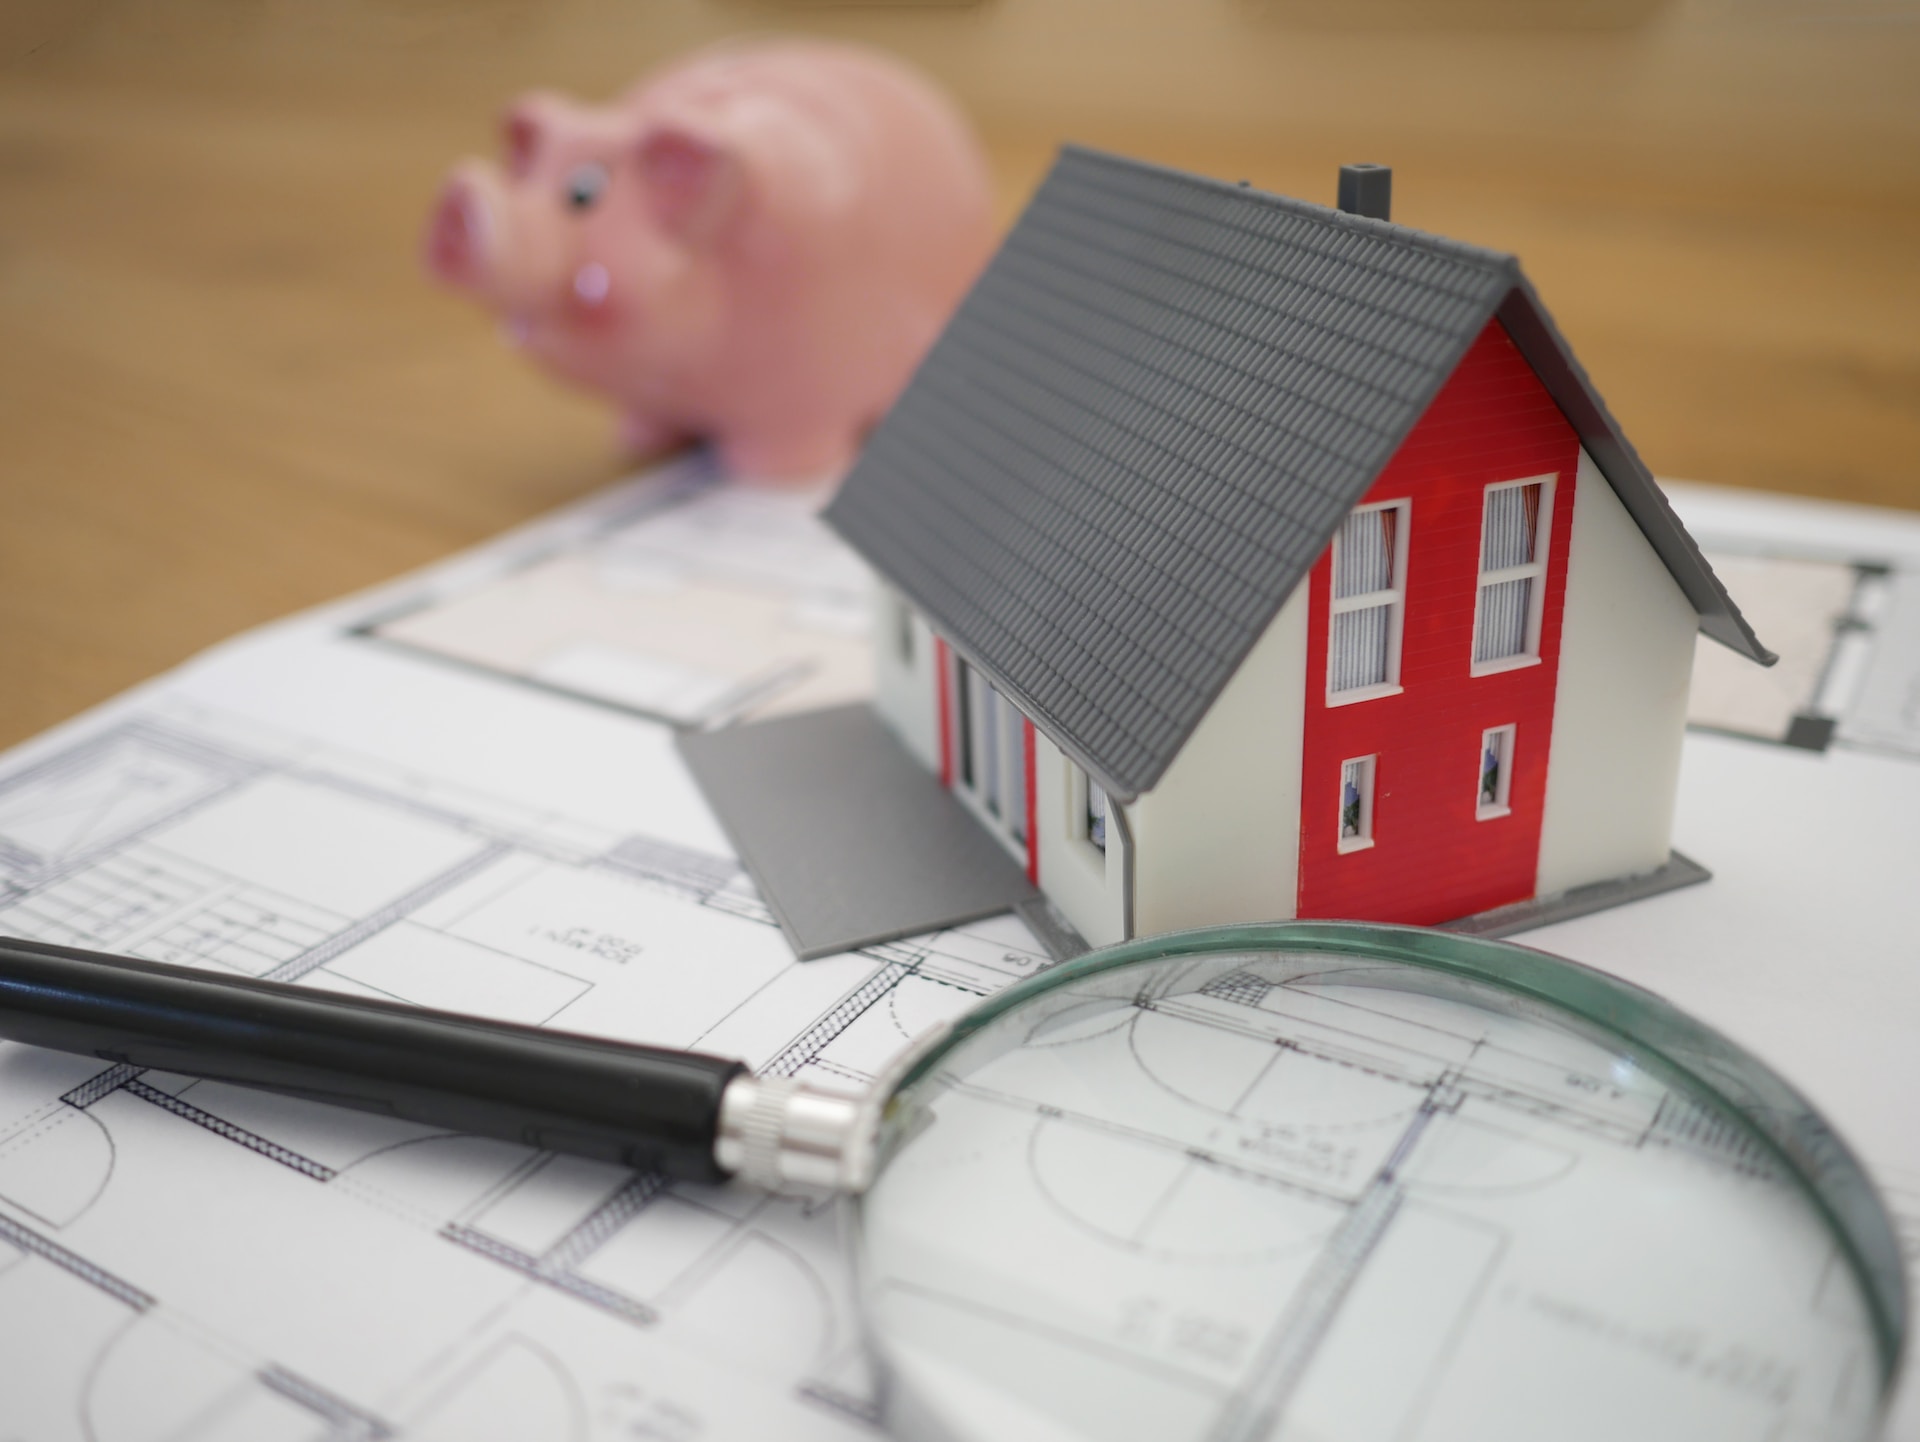 Close up of a model house, sat on a table alongside a magnifying glass and a piggy bank.